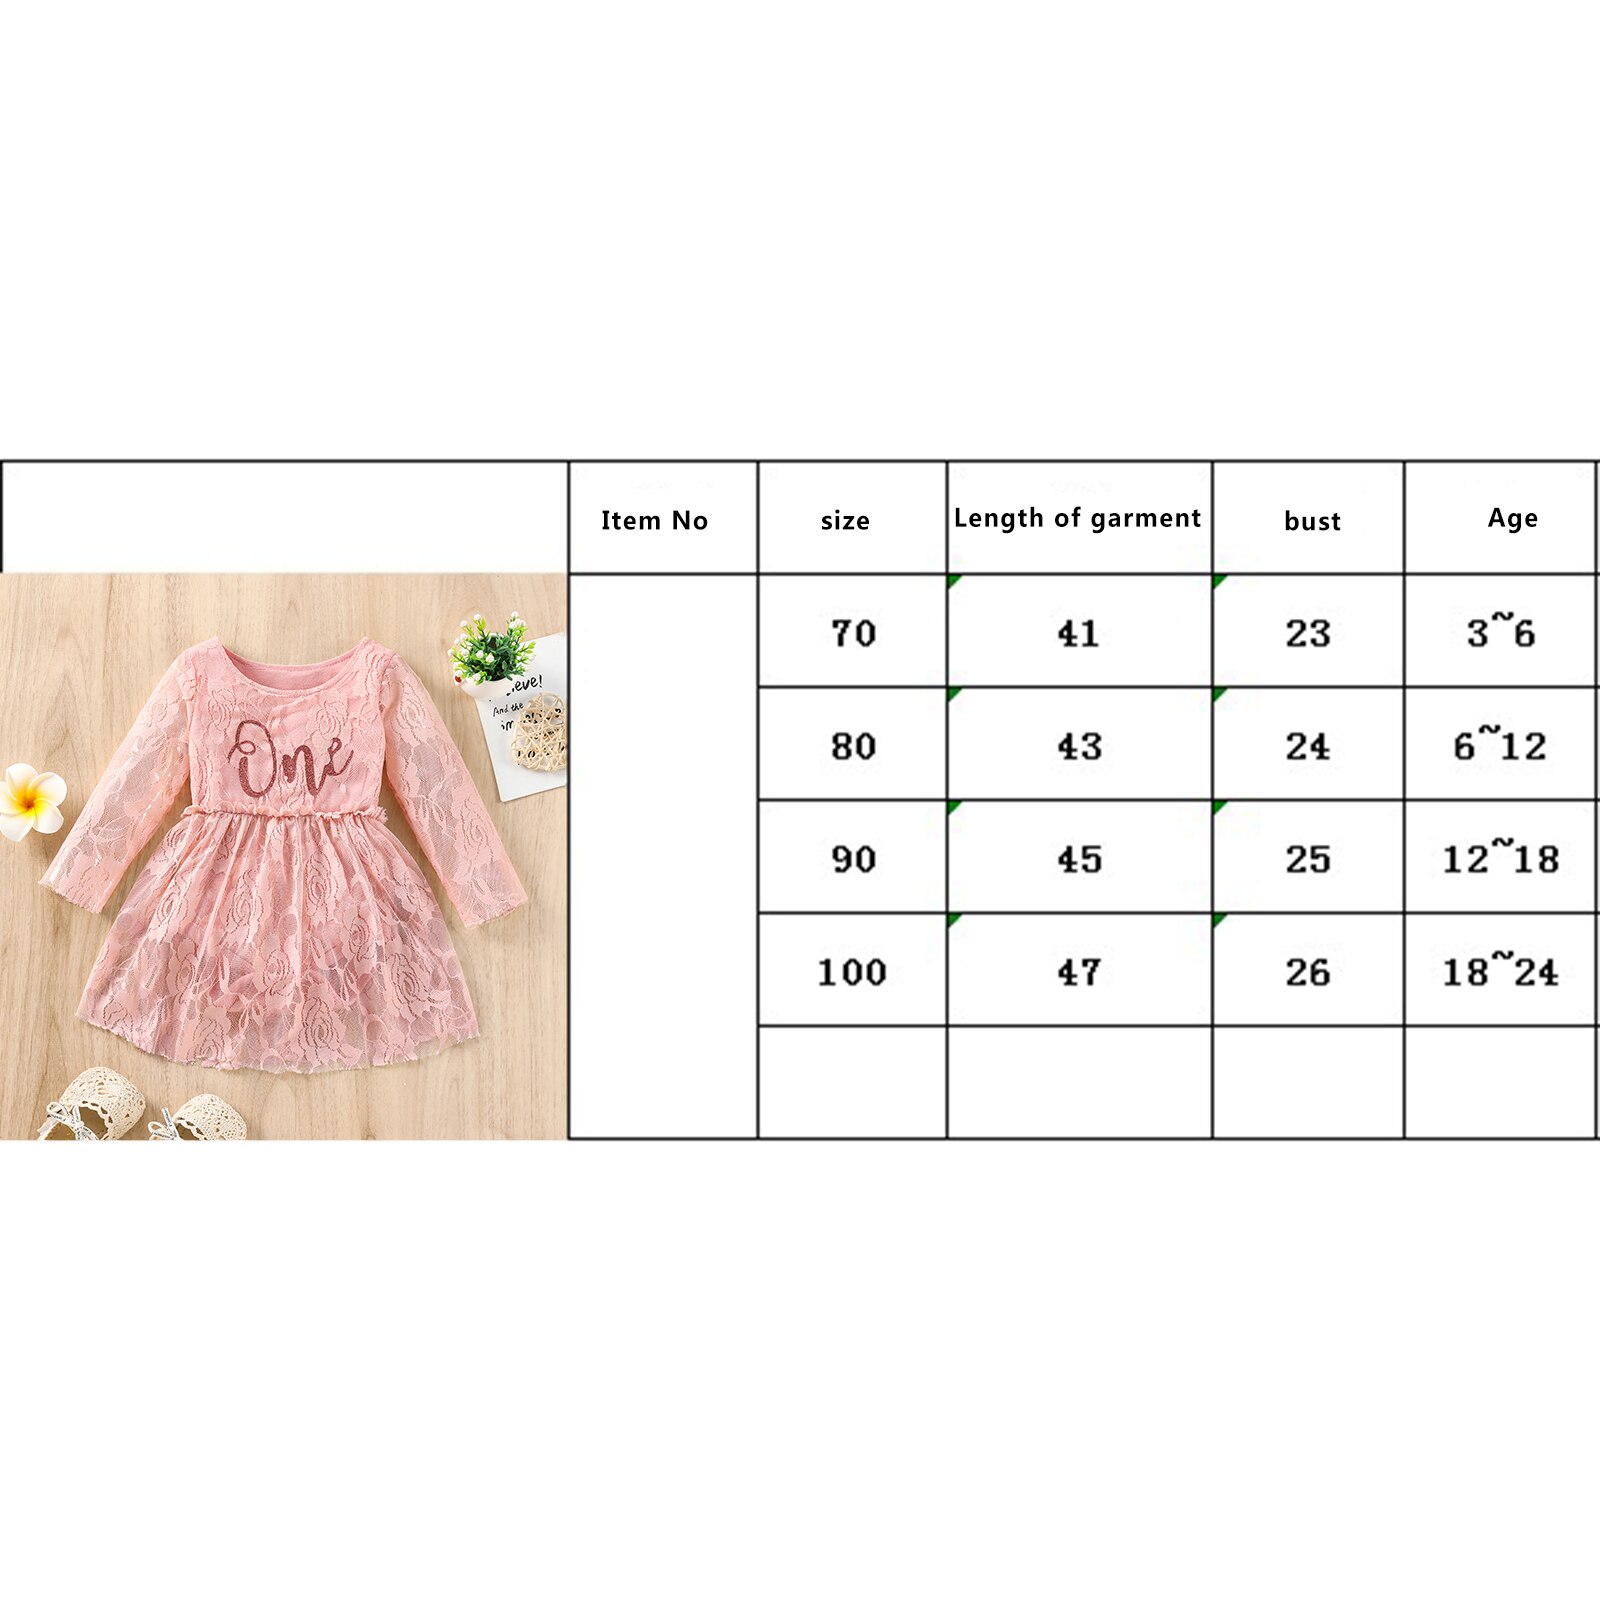 Toddler-Baby-Girls-Romper-Dress-Autumn-Spring-Lovely-Long-Sleeves-Letter-Printed-Lace-Jumpsuits-Children-Cute-5